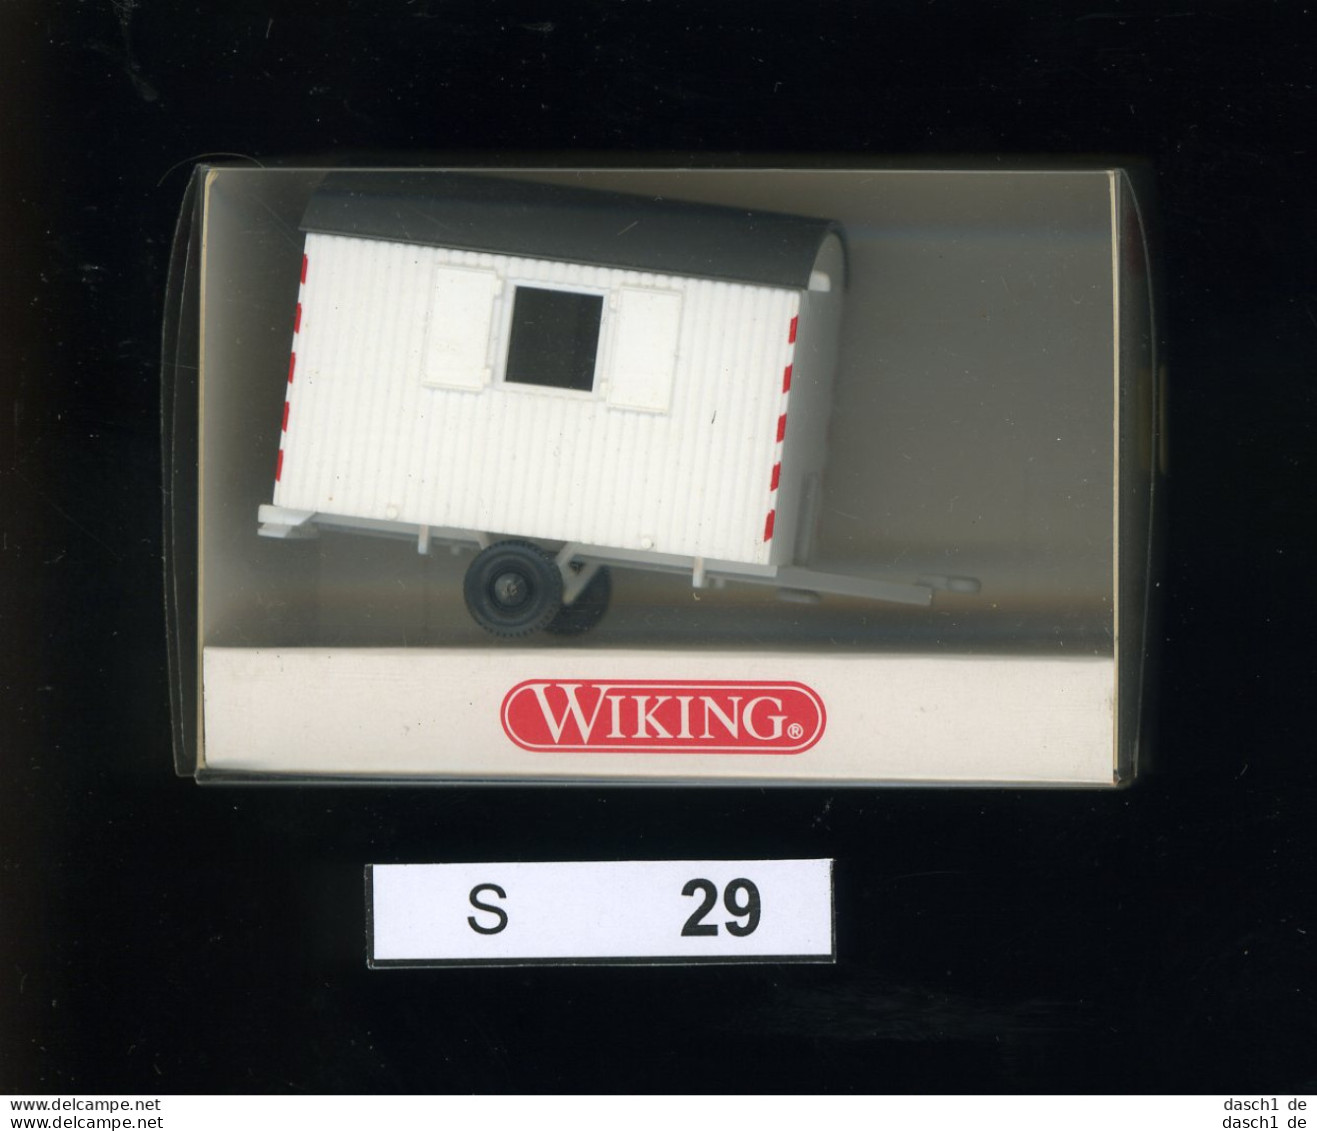 S029, 1:87, Wiking, Bauwagen, Modell 656 01 18 - Véhicules Routiers